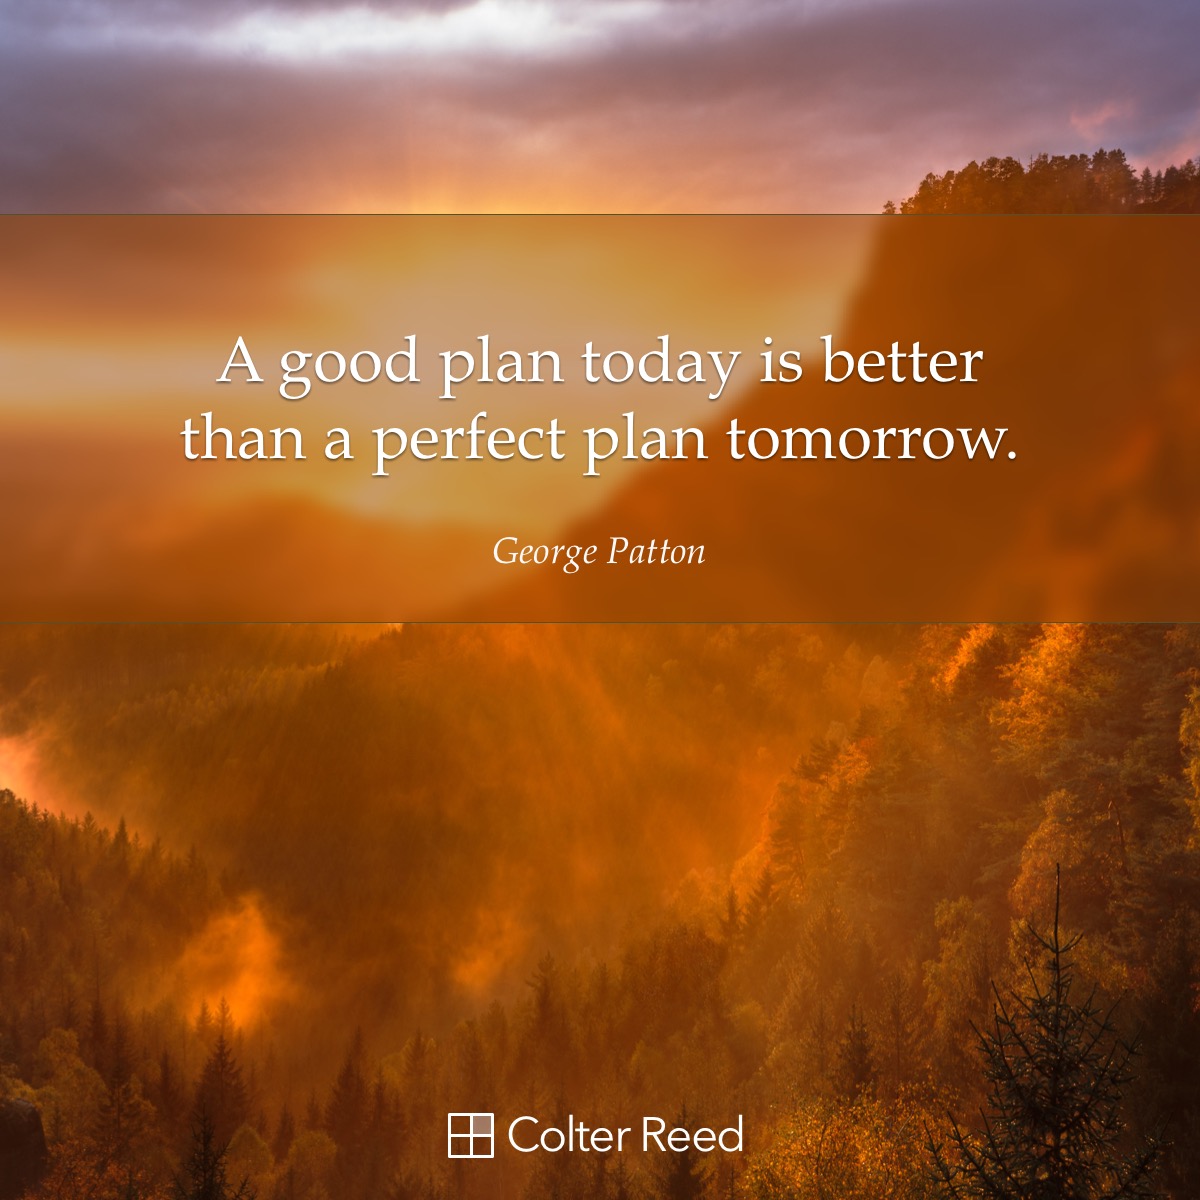 A good plan today is better than a perfect plan tomorrow. —George Patton